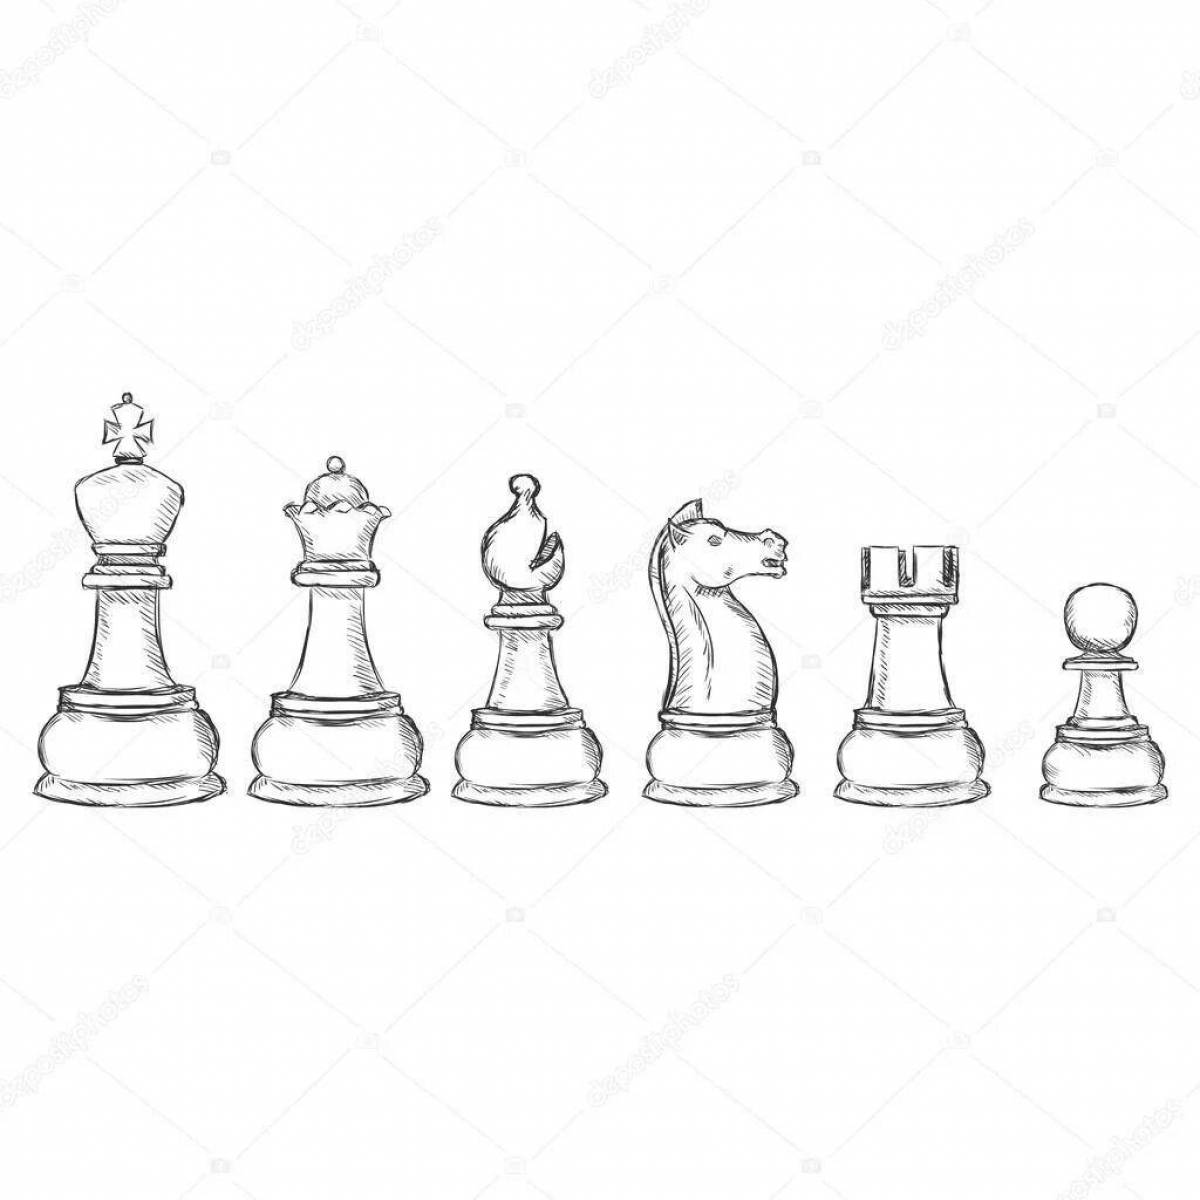 Violent chess pieces coloring book